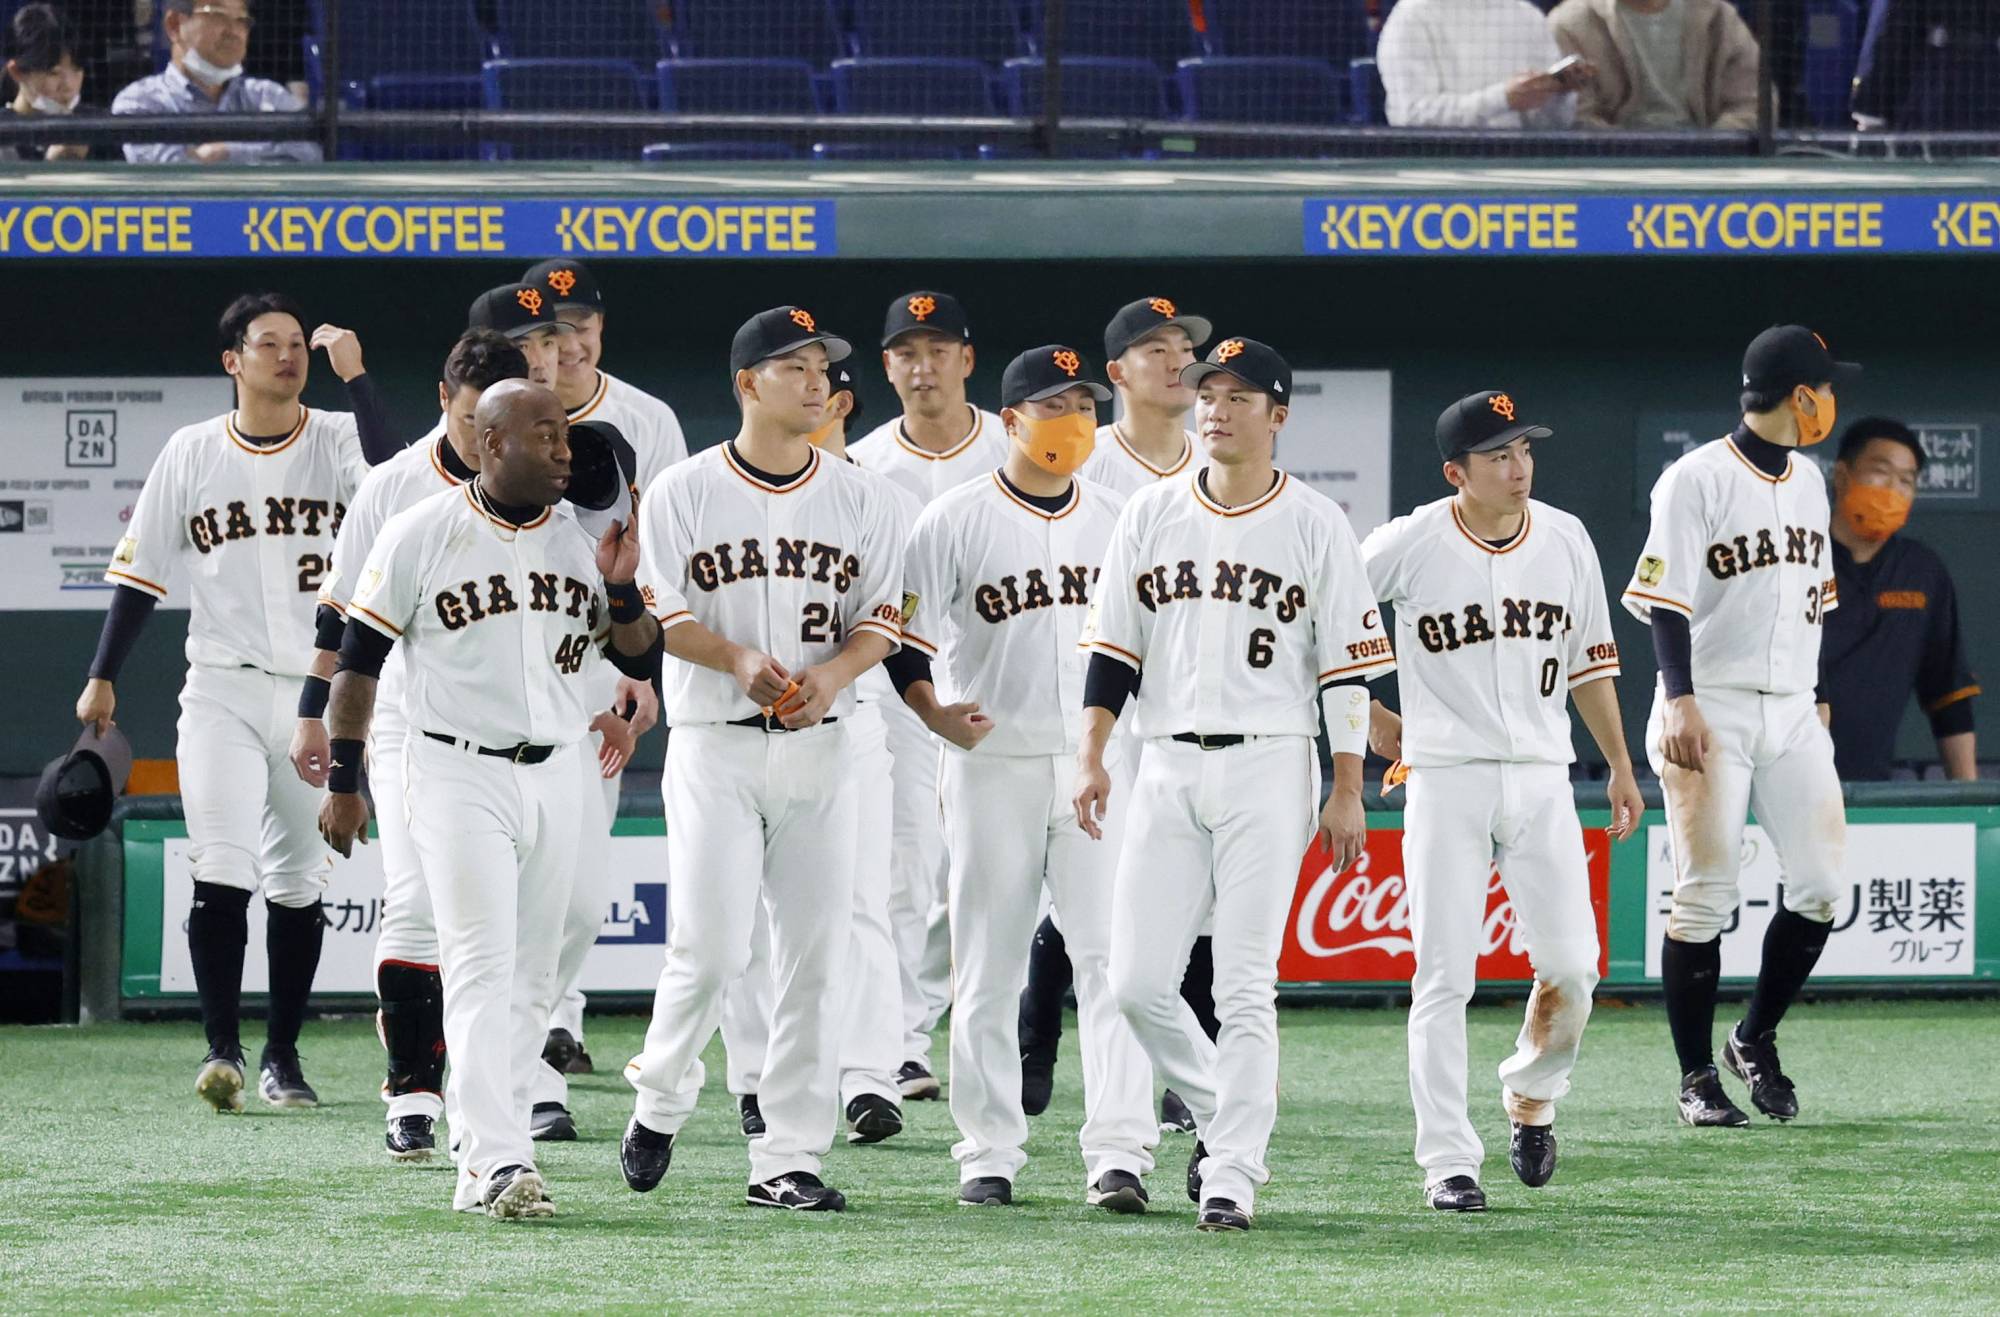 Who's Your Team? Comparing NPB to MLB - JapanBall